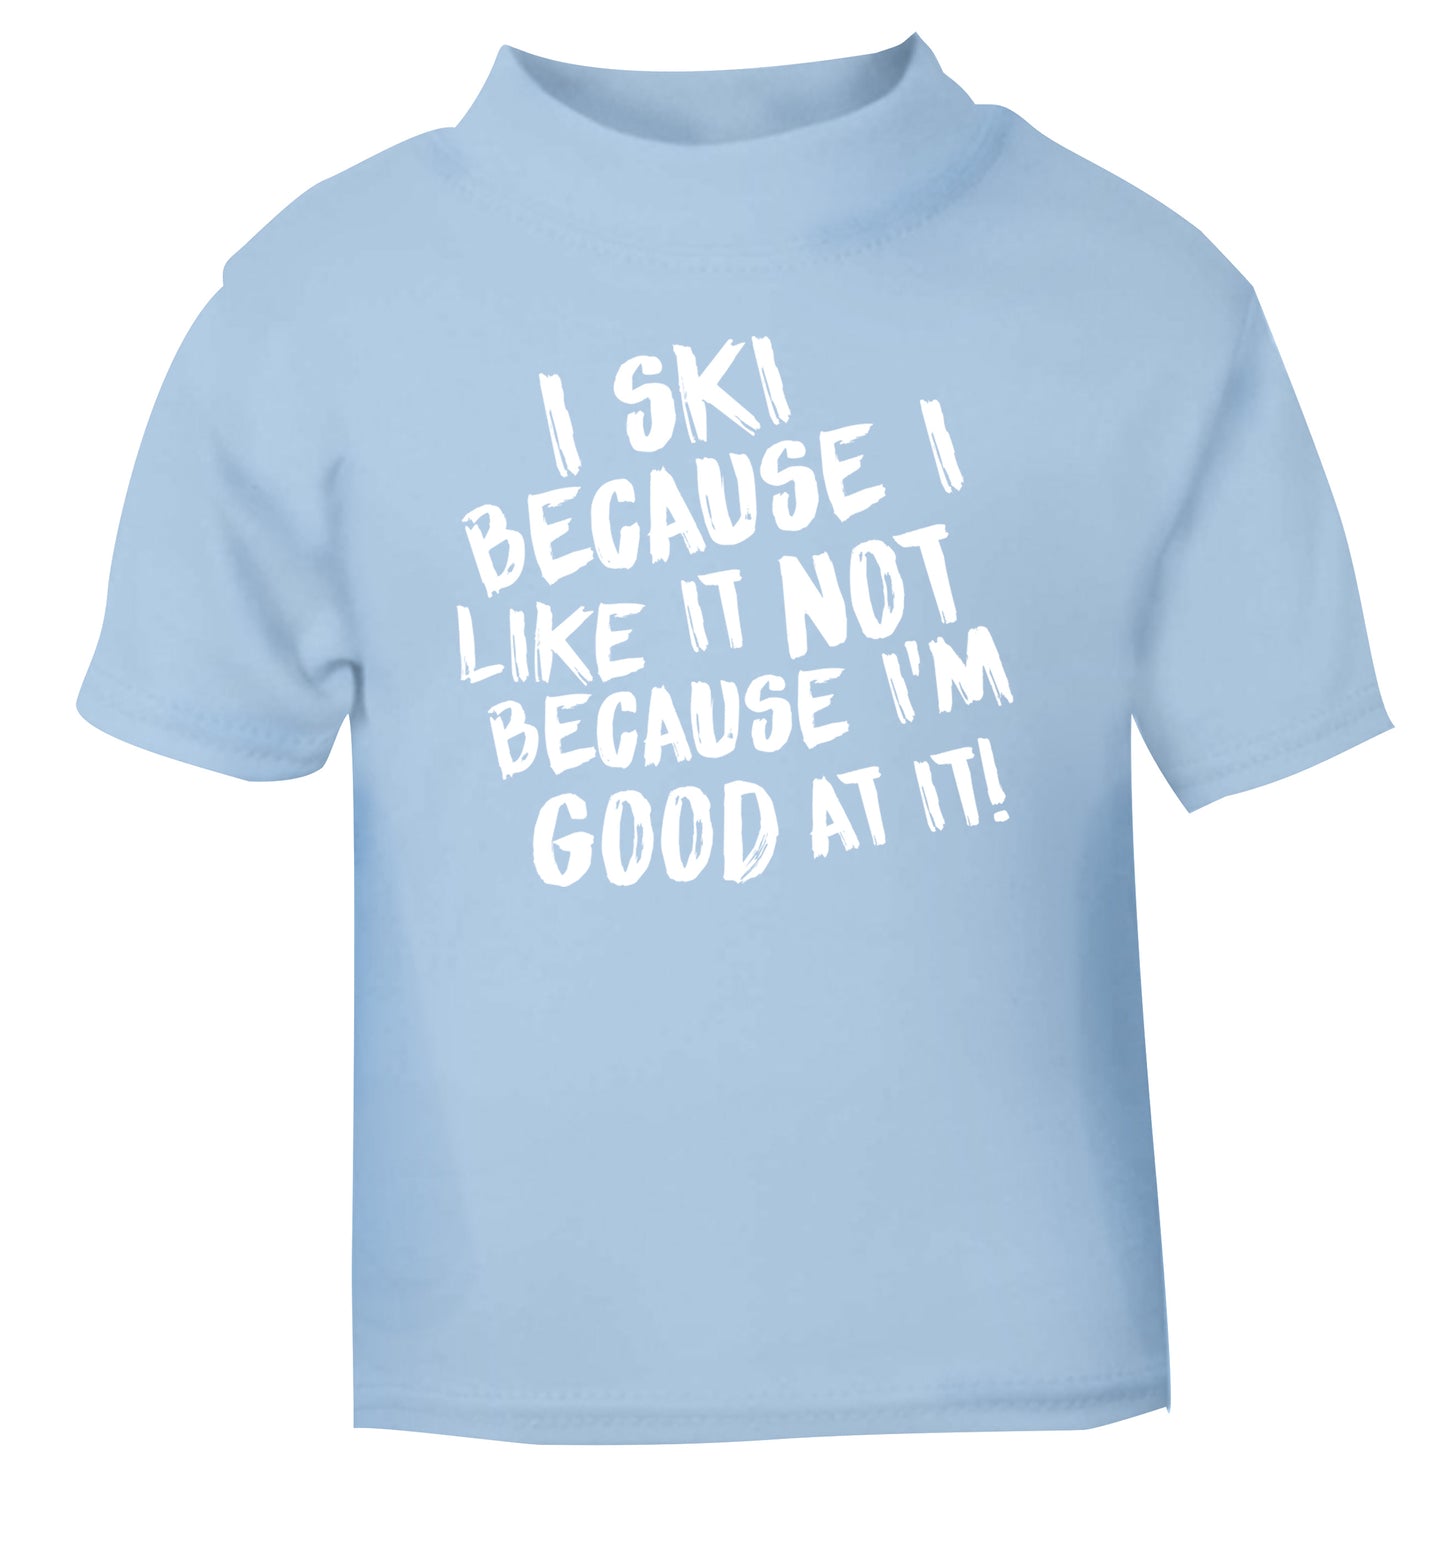 I ski because I like it not because I'm good at it light blue Baby Toddler Tshirt 2 Years